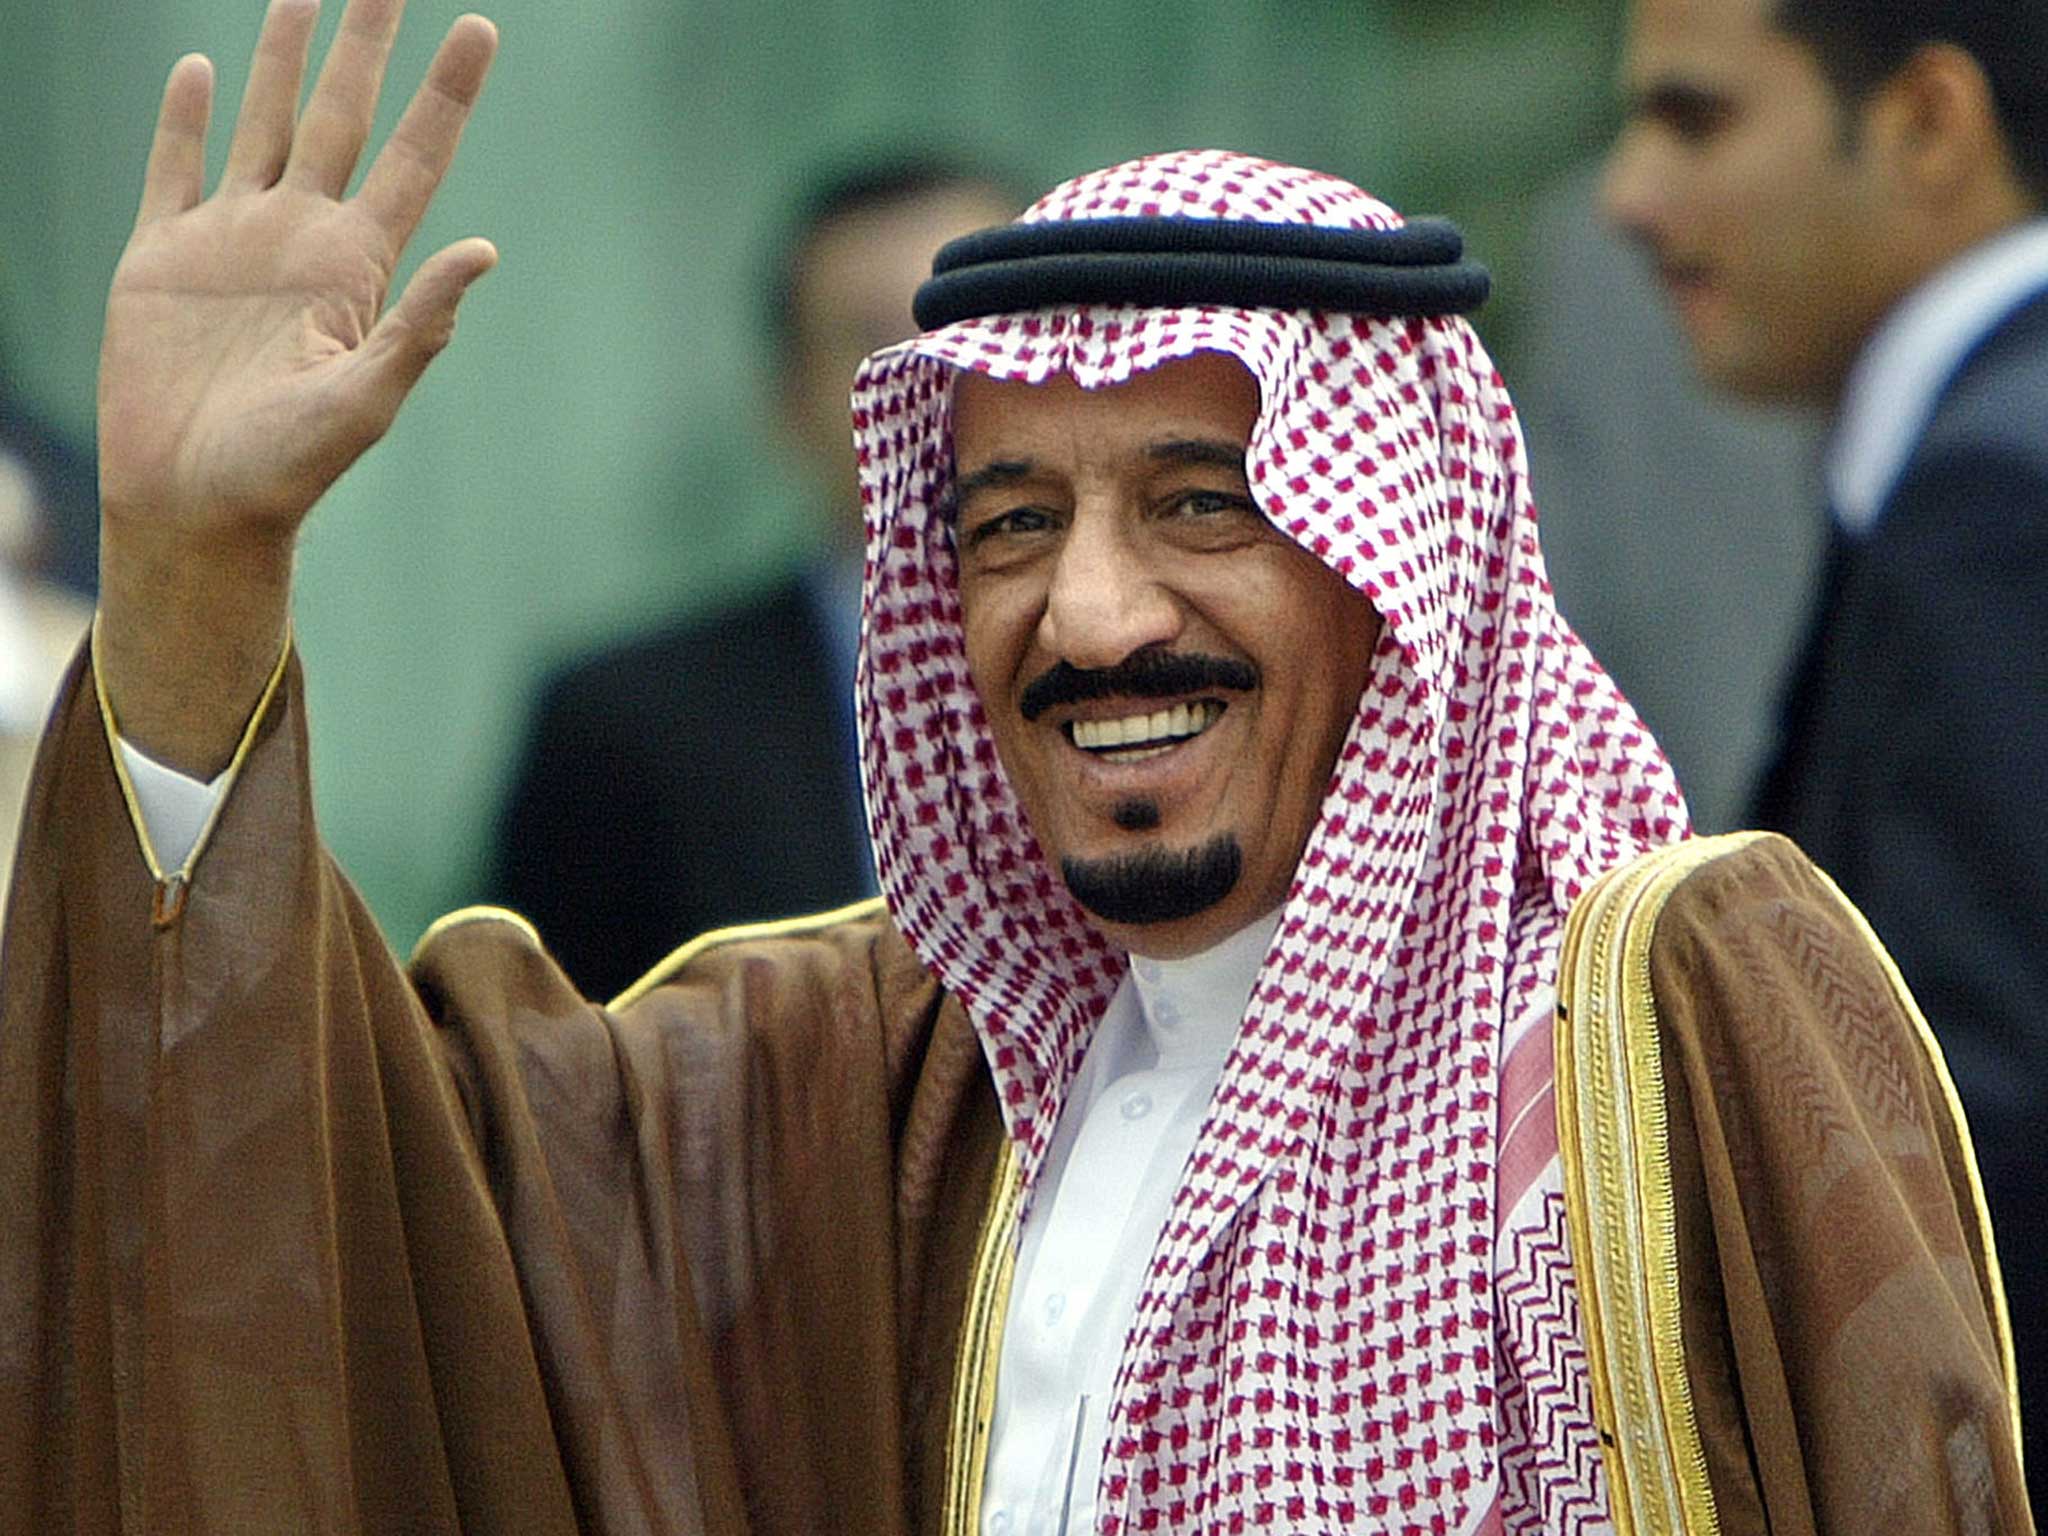 King Salman governed Riyadh province for almost five decades